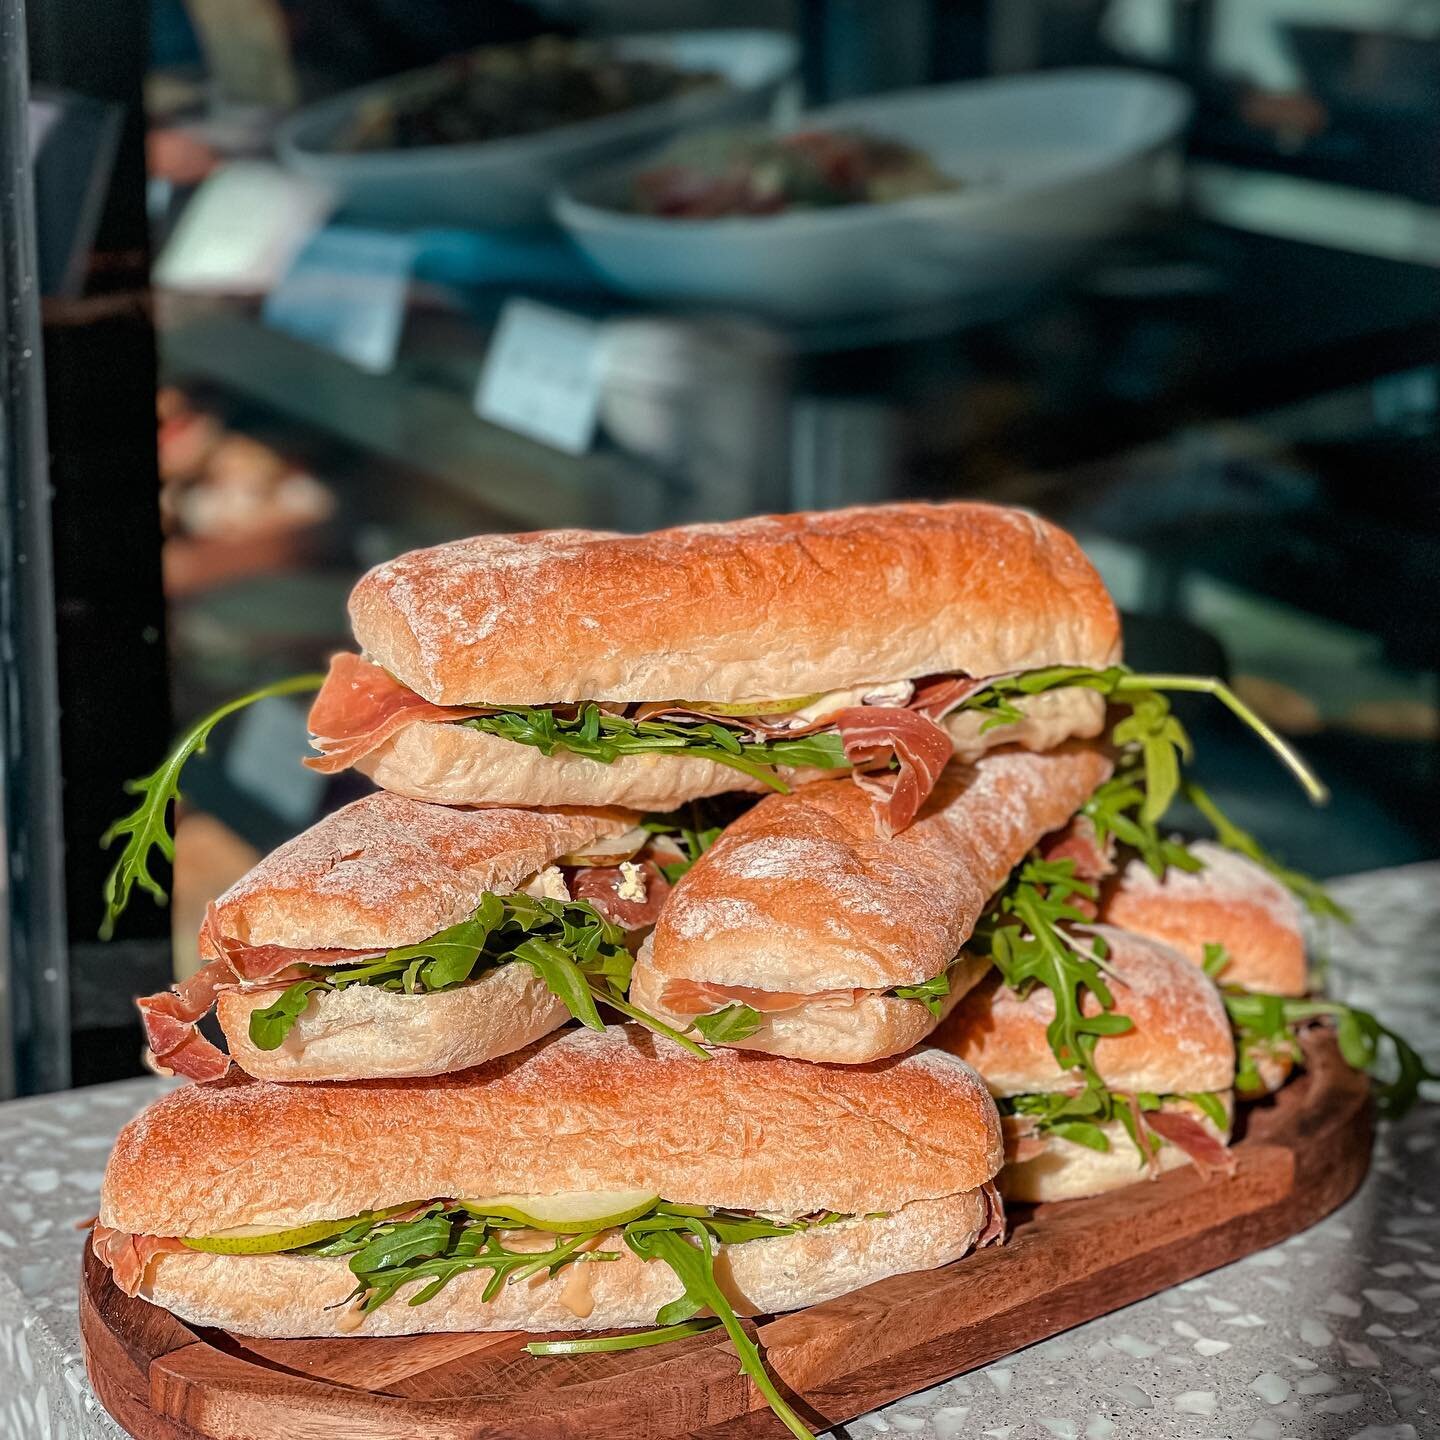 The first day of spring calls for a fresh and tasty lunch 🥪 How about our prosciutto,brie + pear ciabatta? It&rsquo;s yours until 2pm! 

#torquayfood #torquaylife #torquayvictoria #geelongfoodie #torquayfoodie #oceangrovefood #barwonheads #anglesea 